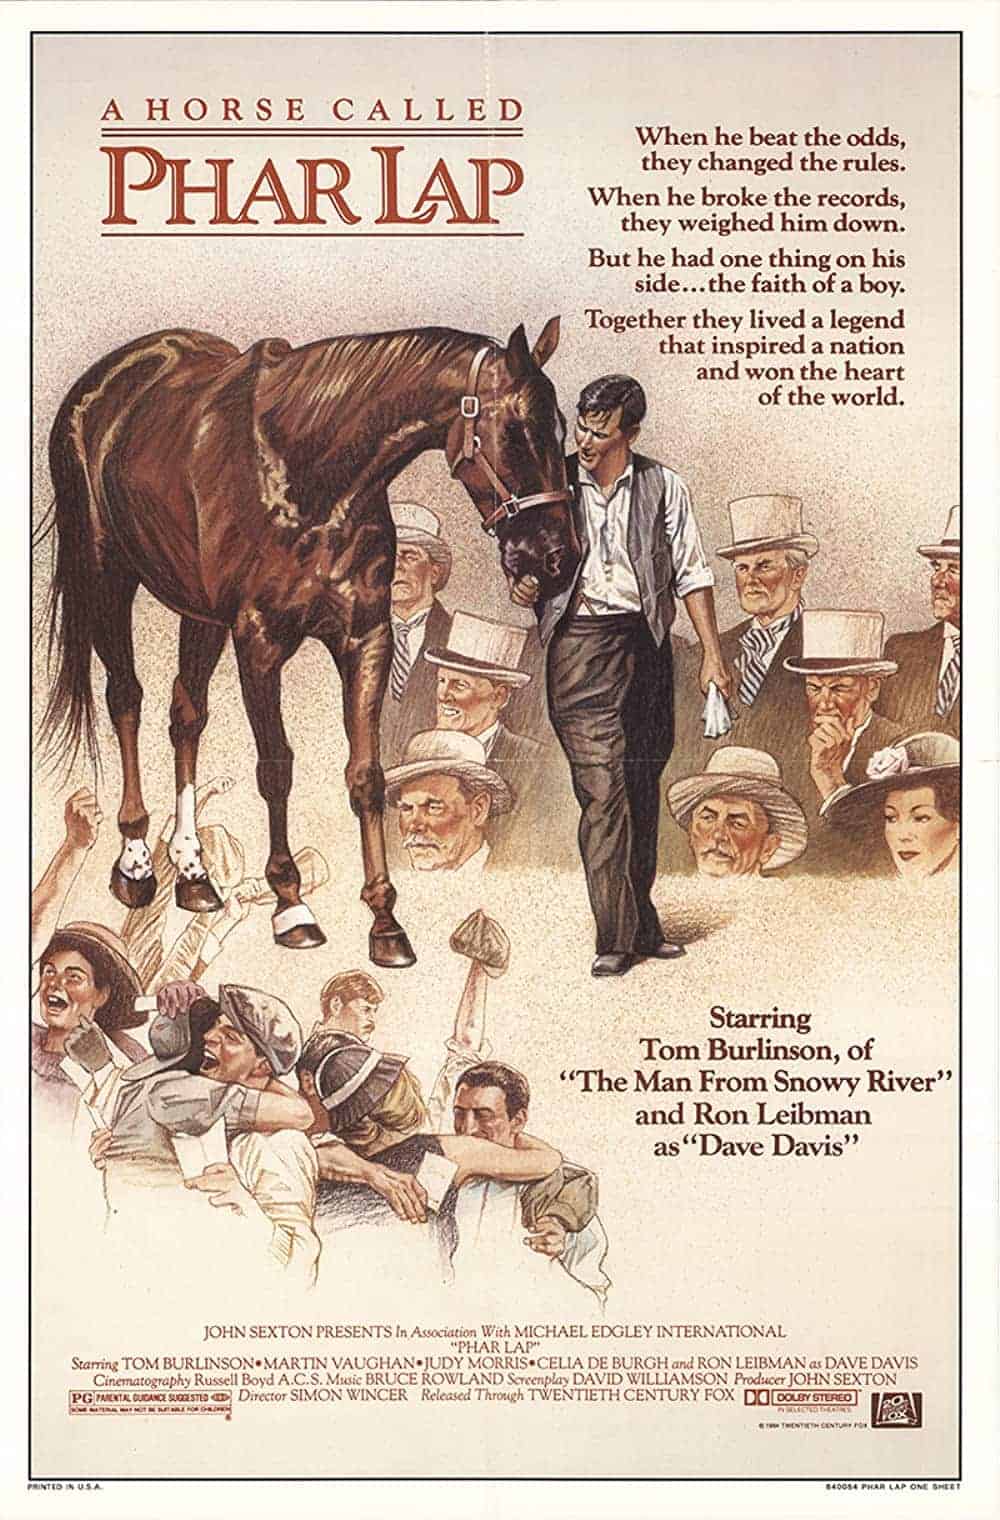 Phar Lap (1983) Best Horse Racing Movies to Feel The Life